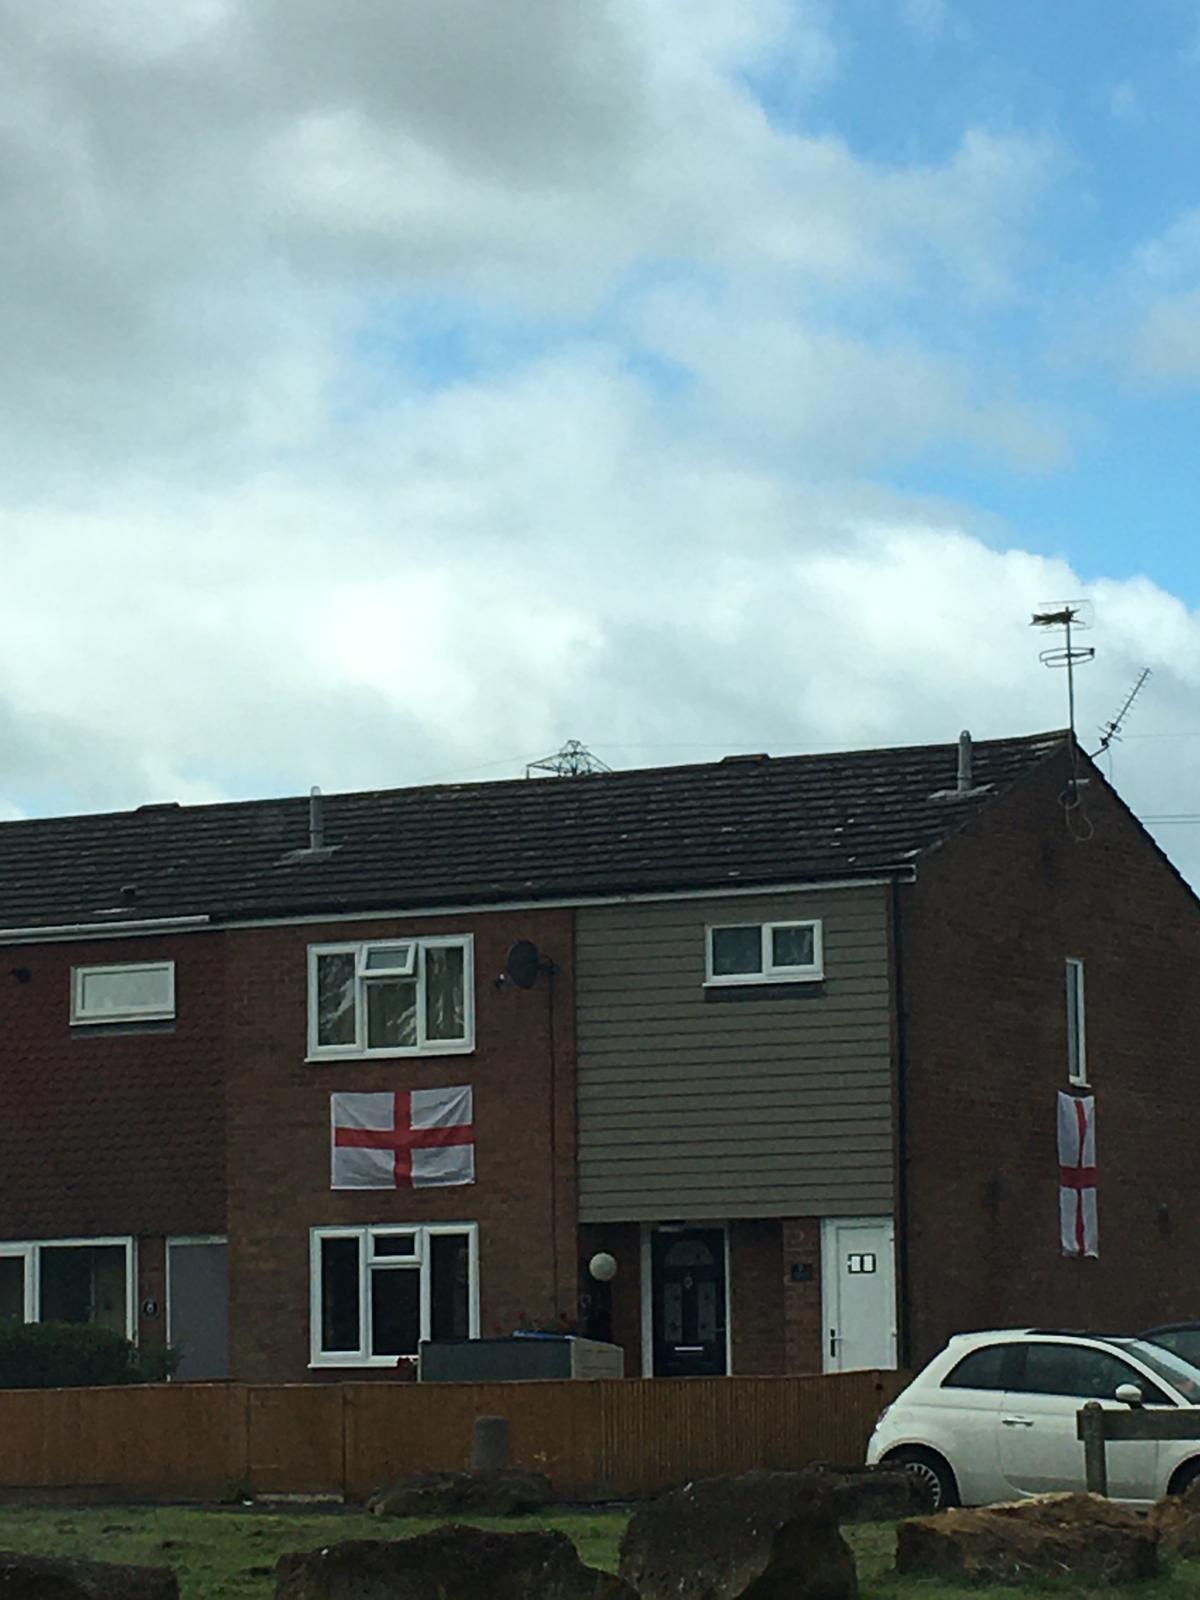 Two flags are seen in Cornbrook Road in Aylesbury